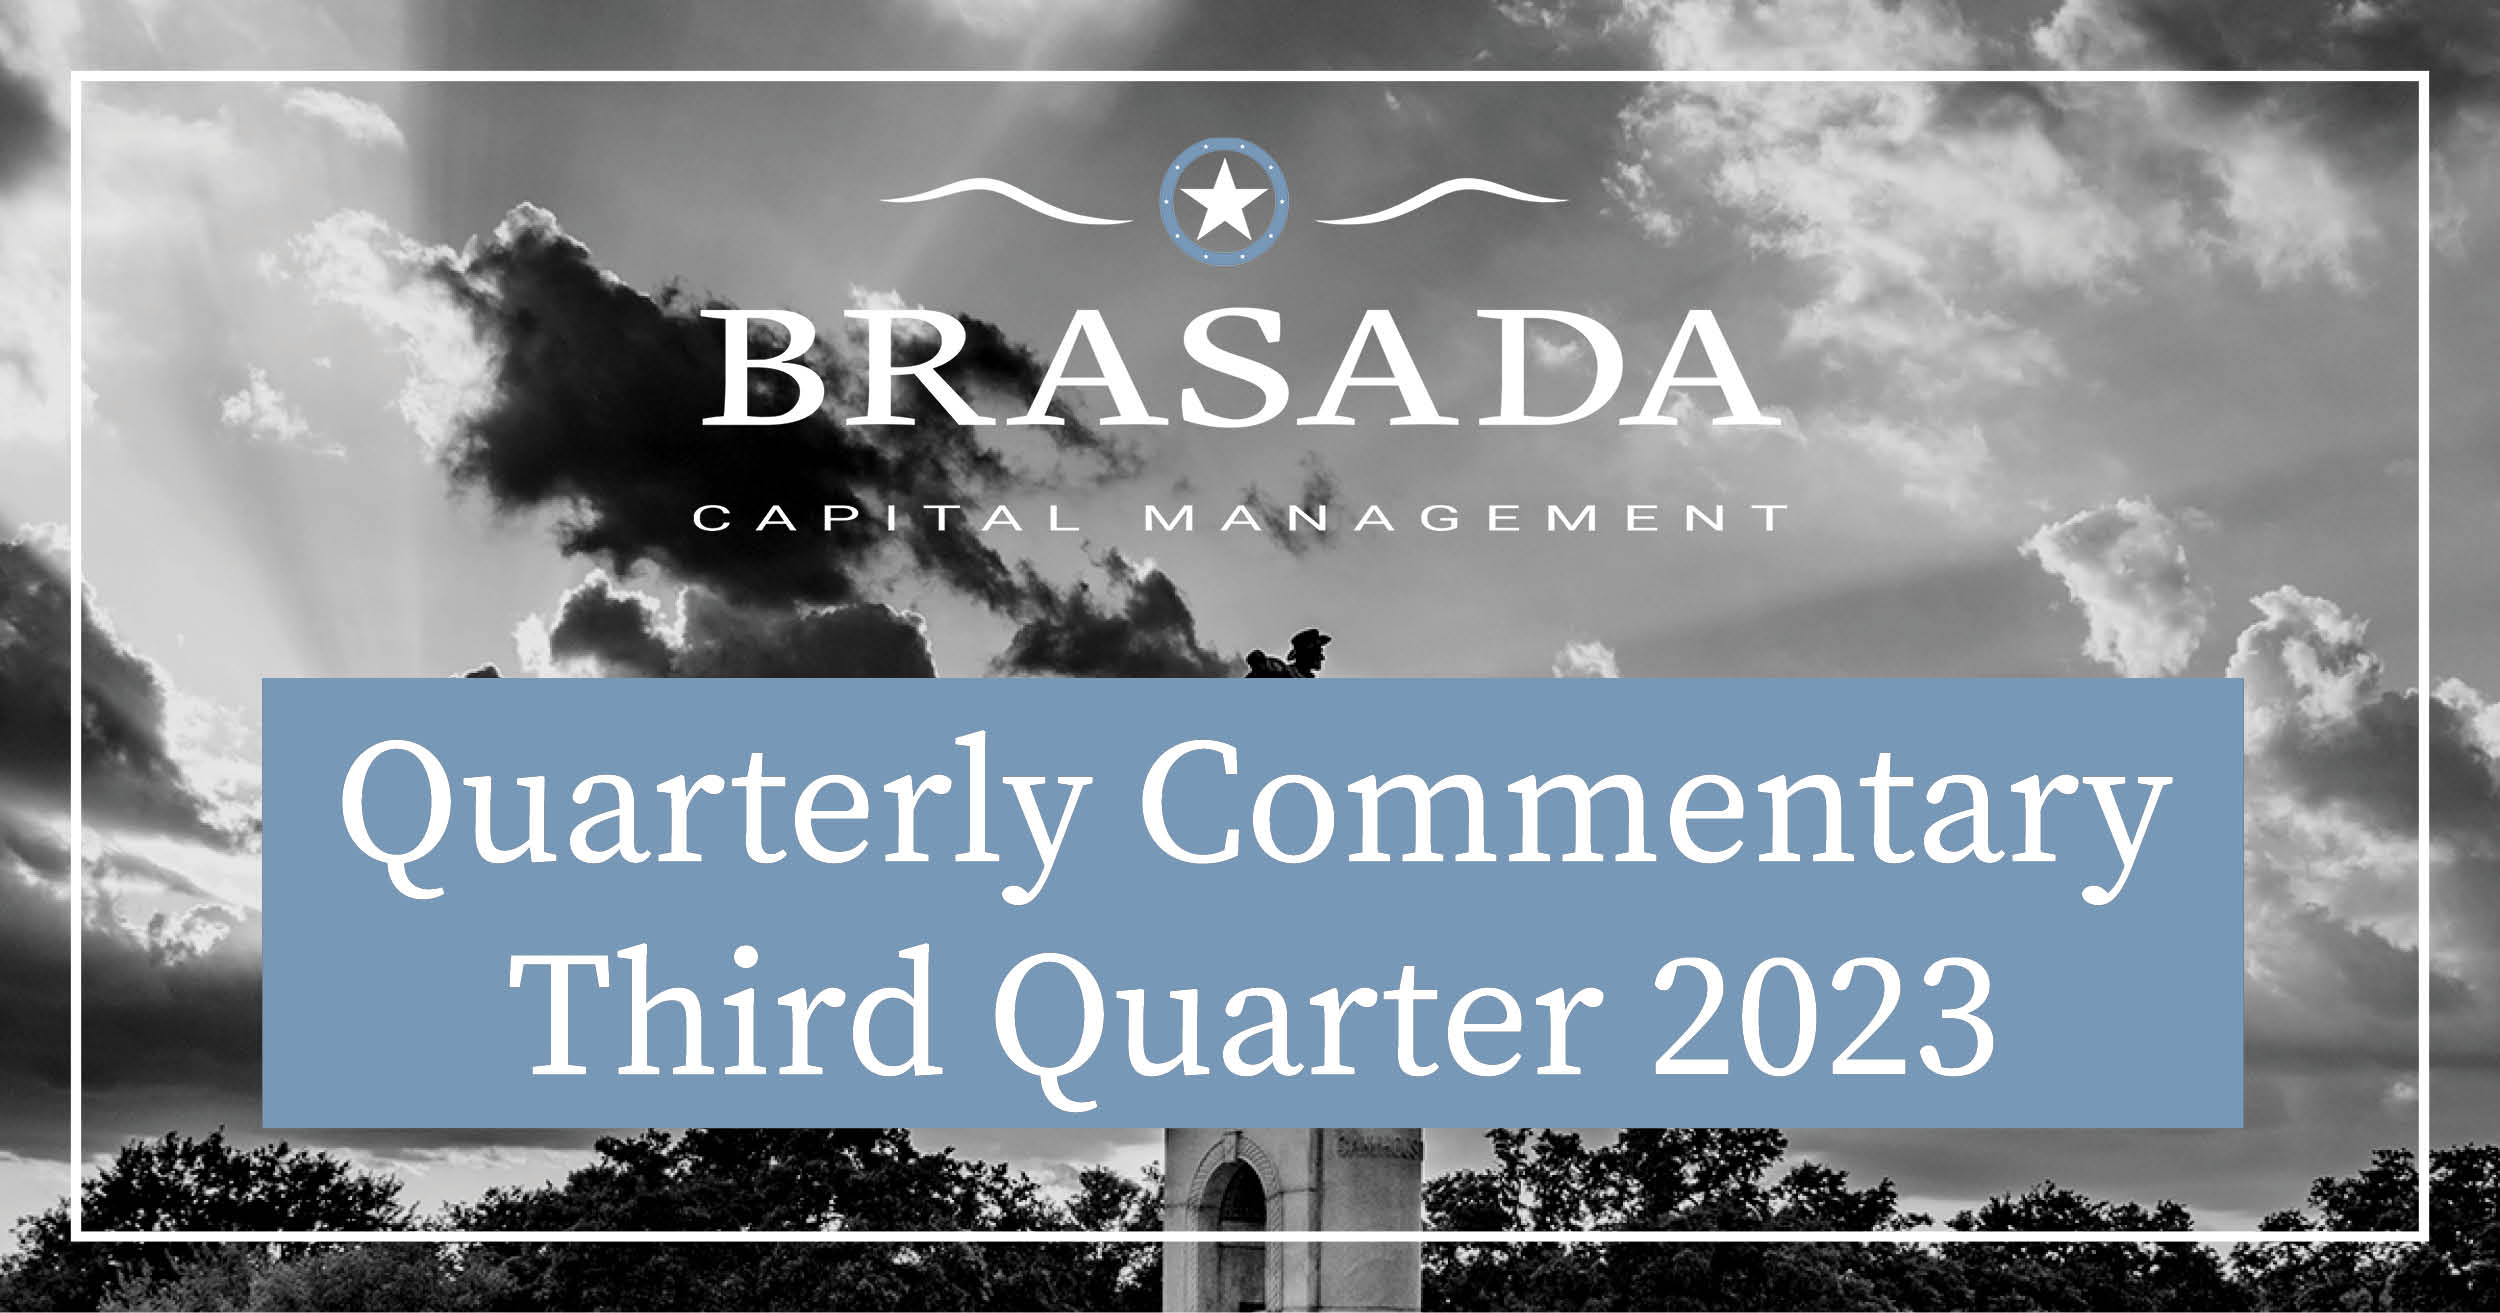 Third Quarter of 2023: Global Uncertainty